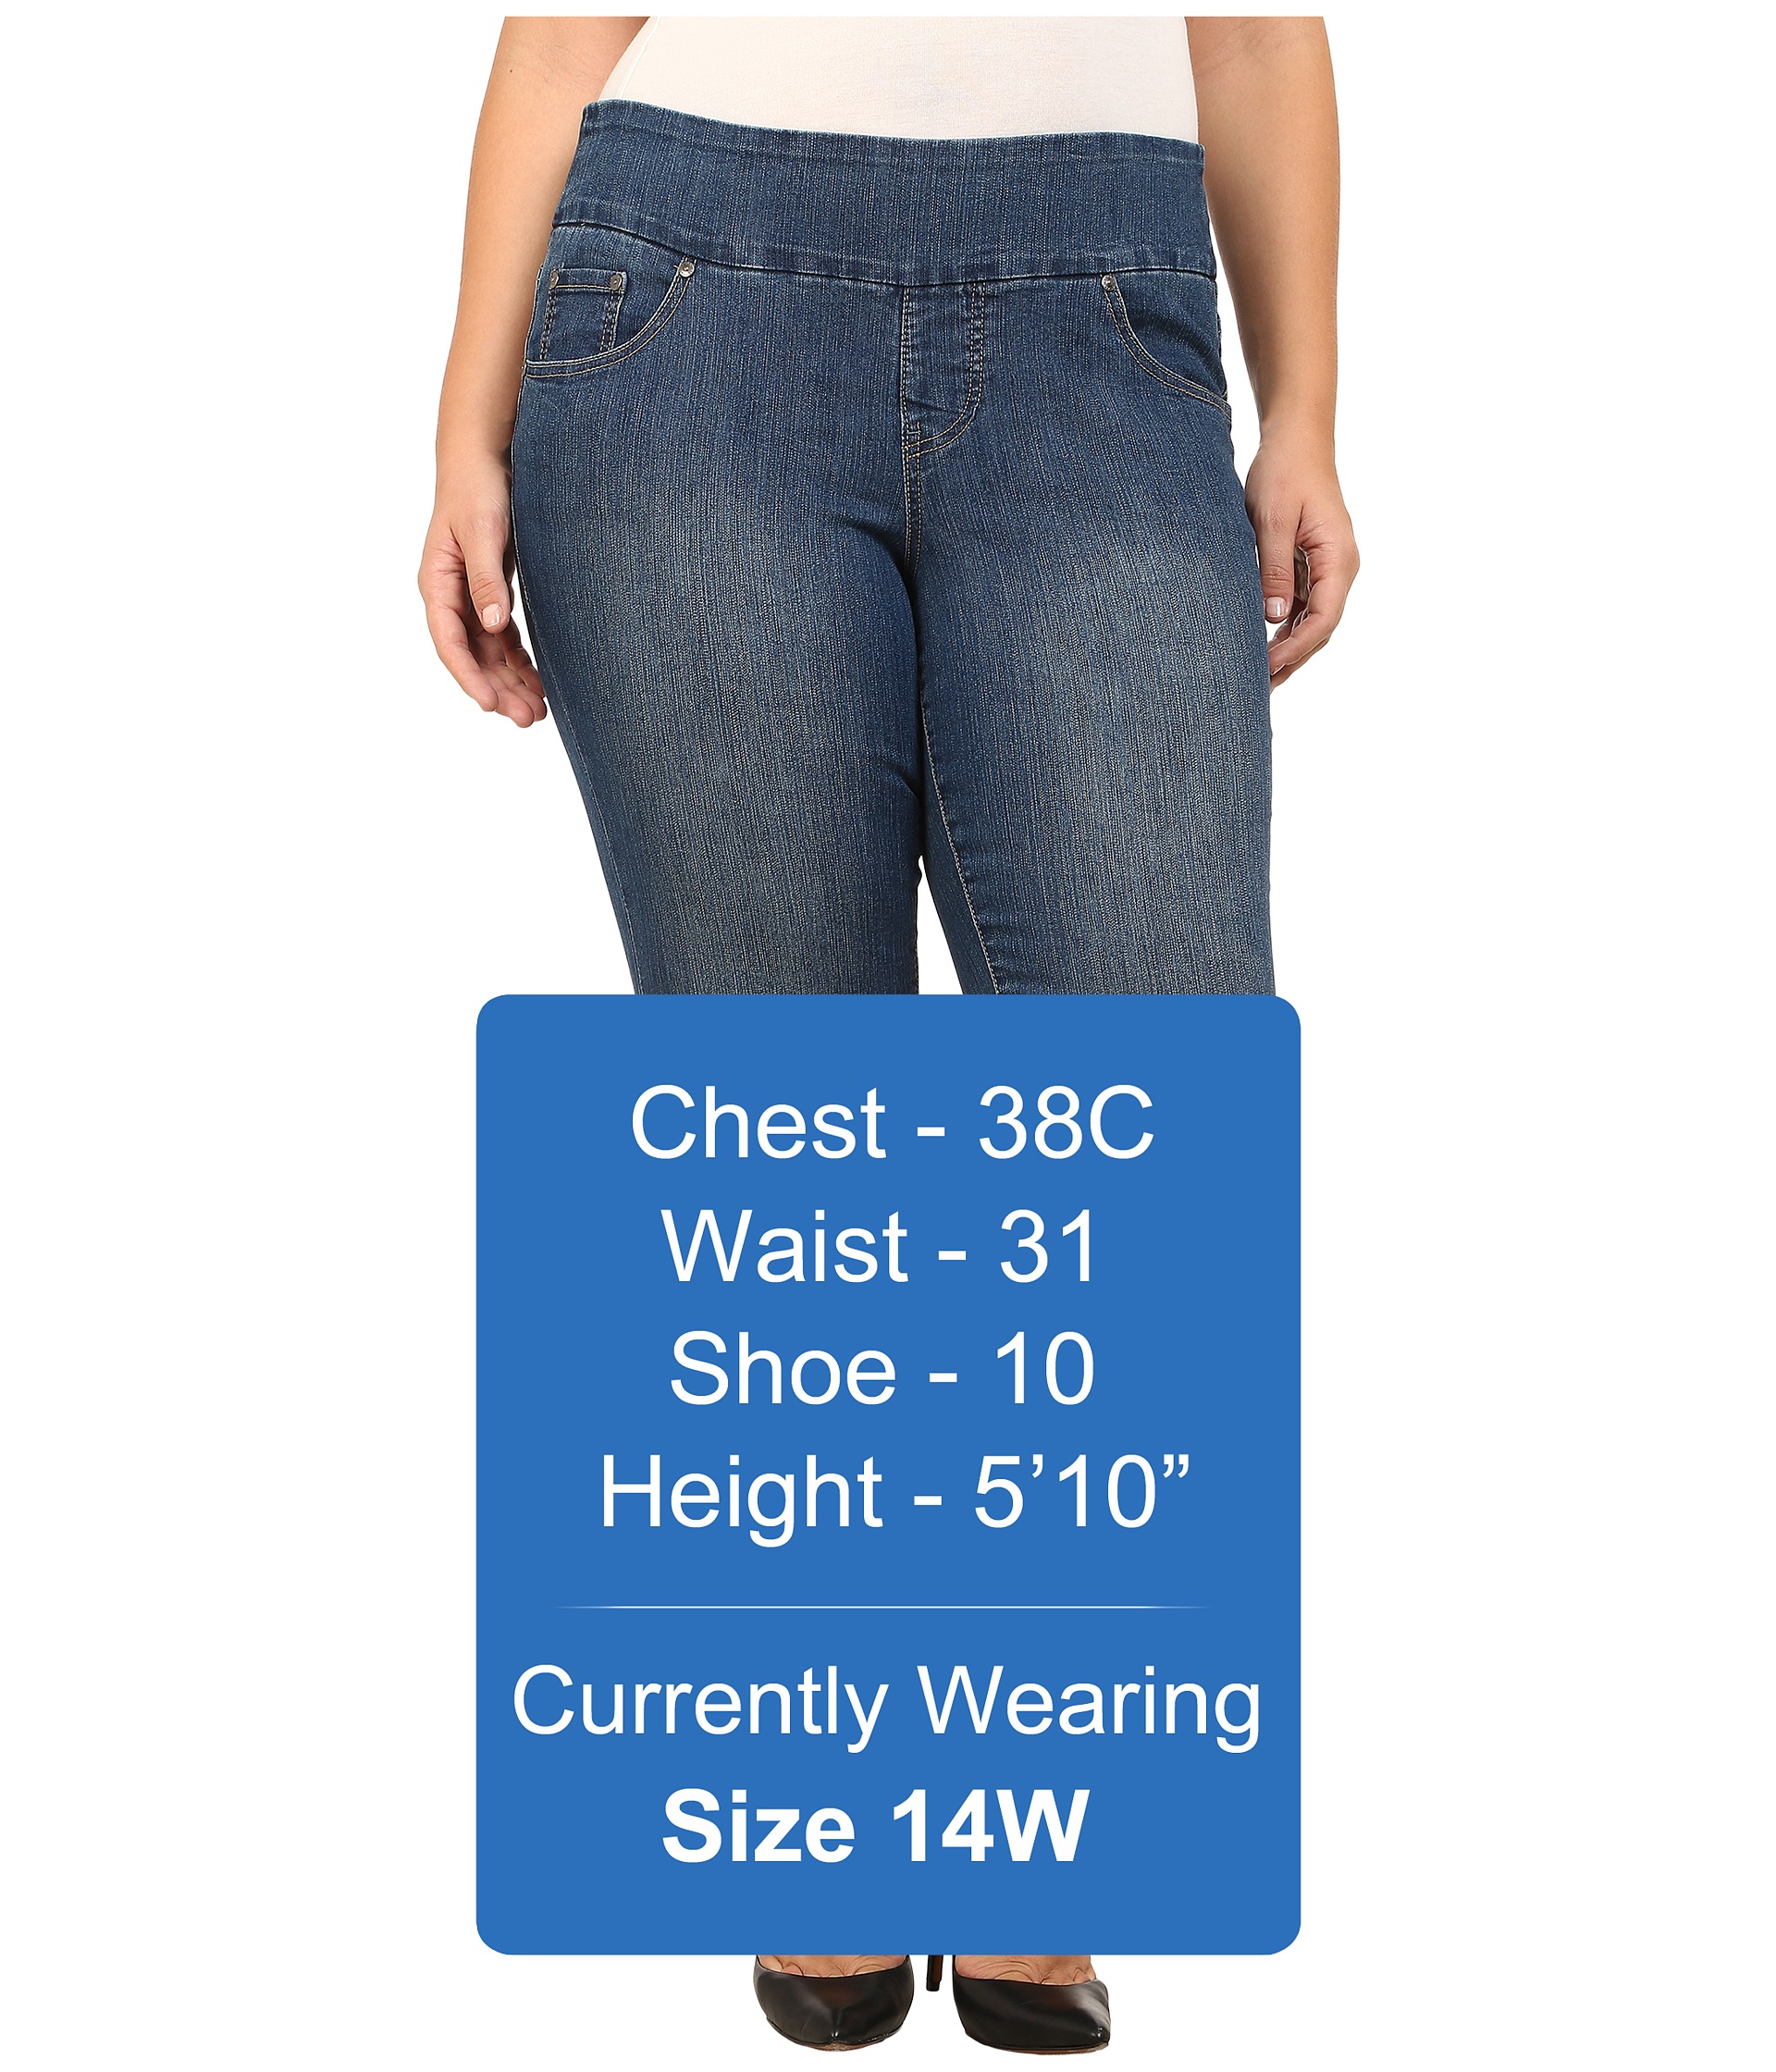 Jag Jeans Plus Size Plus Size Peri Pull On Straight Jeans in Blue Dive ...